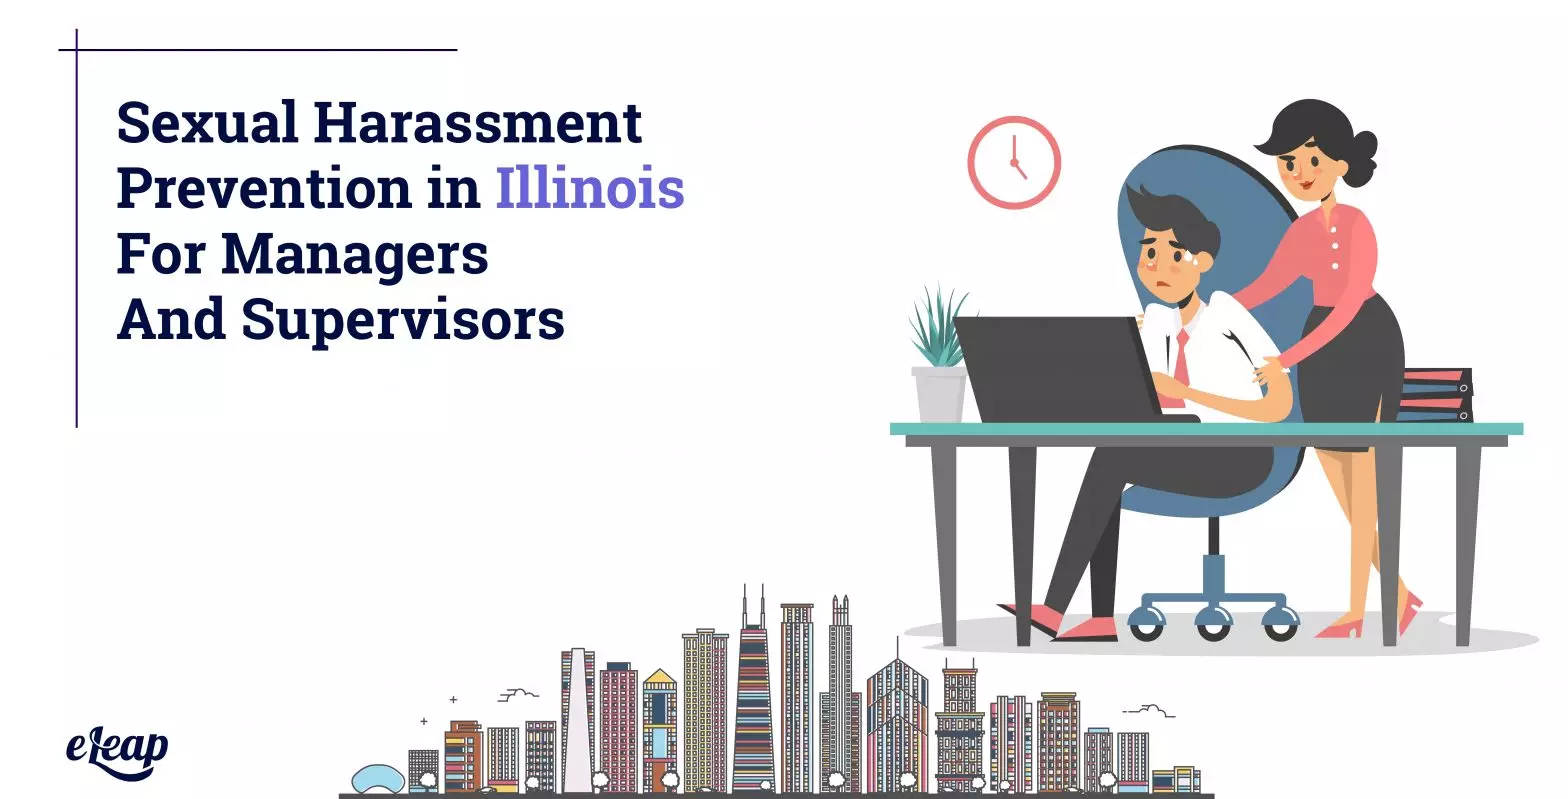 How to Be Sure Your Company is in Line with Illinois Mandated Sexual Harassment Training